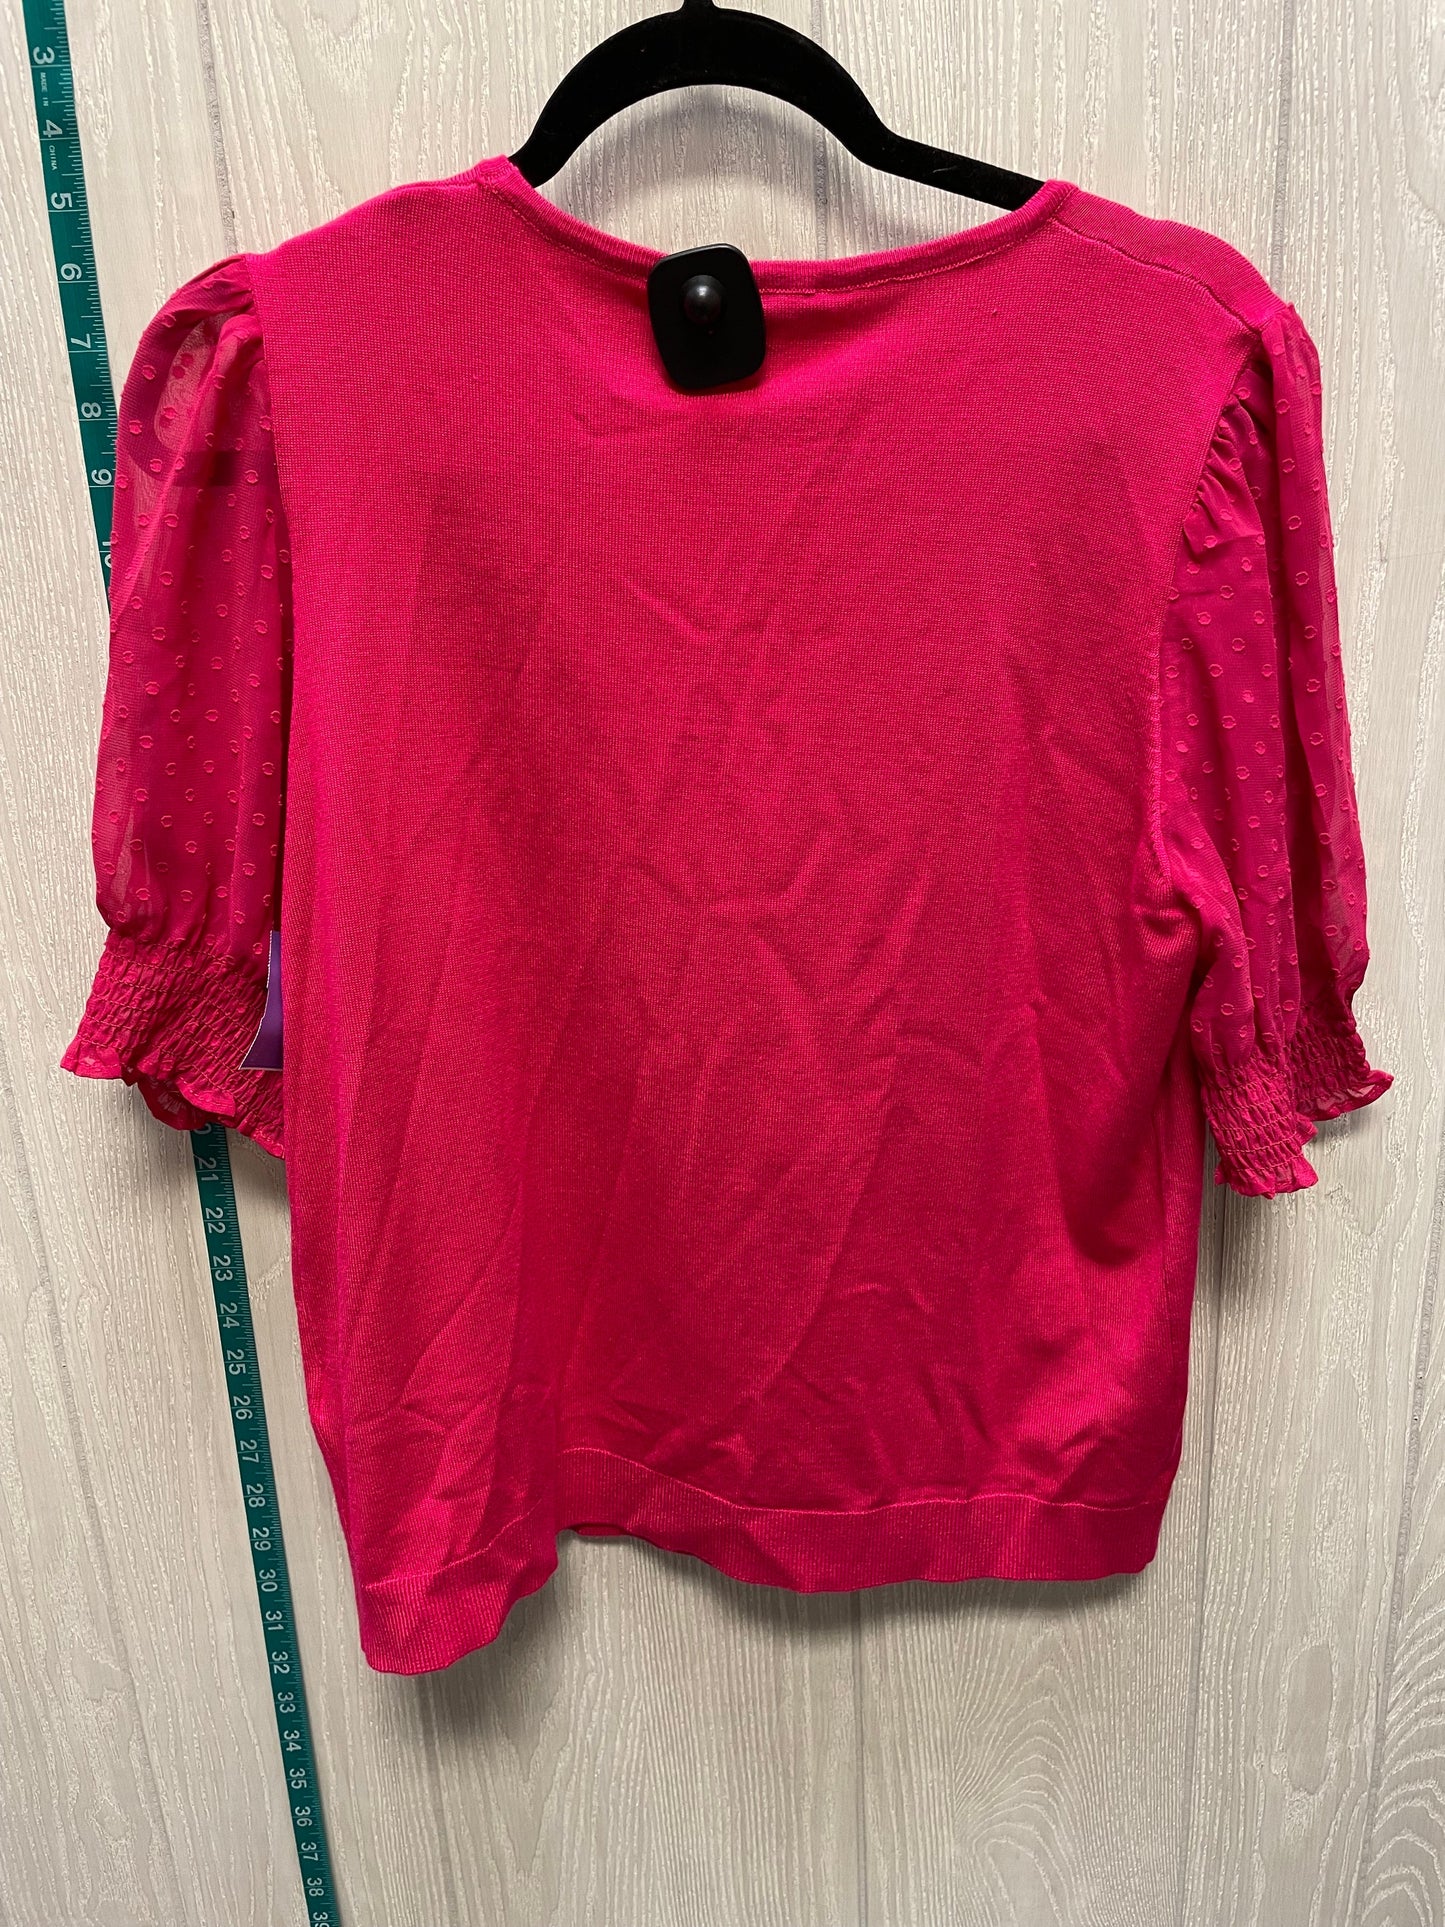 Pink Top Short Sleeve Adrianna Papell, Size L